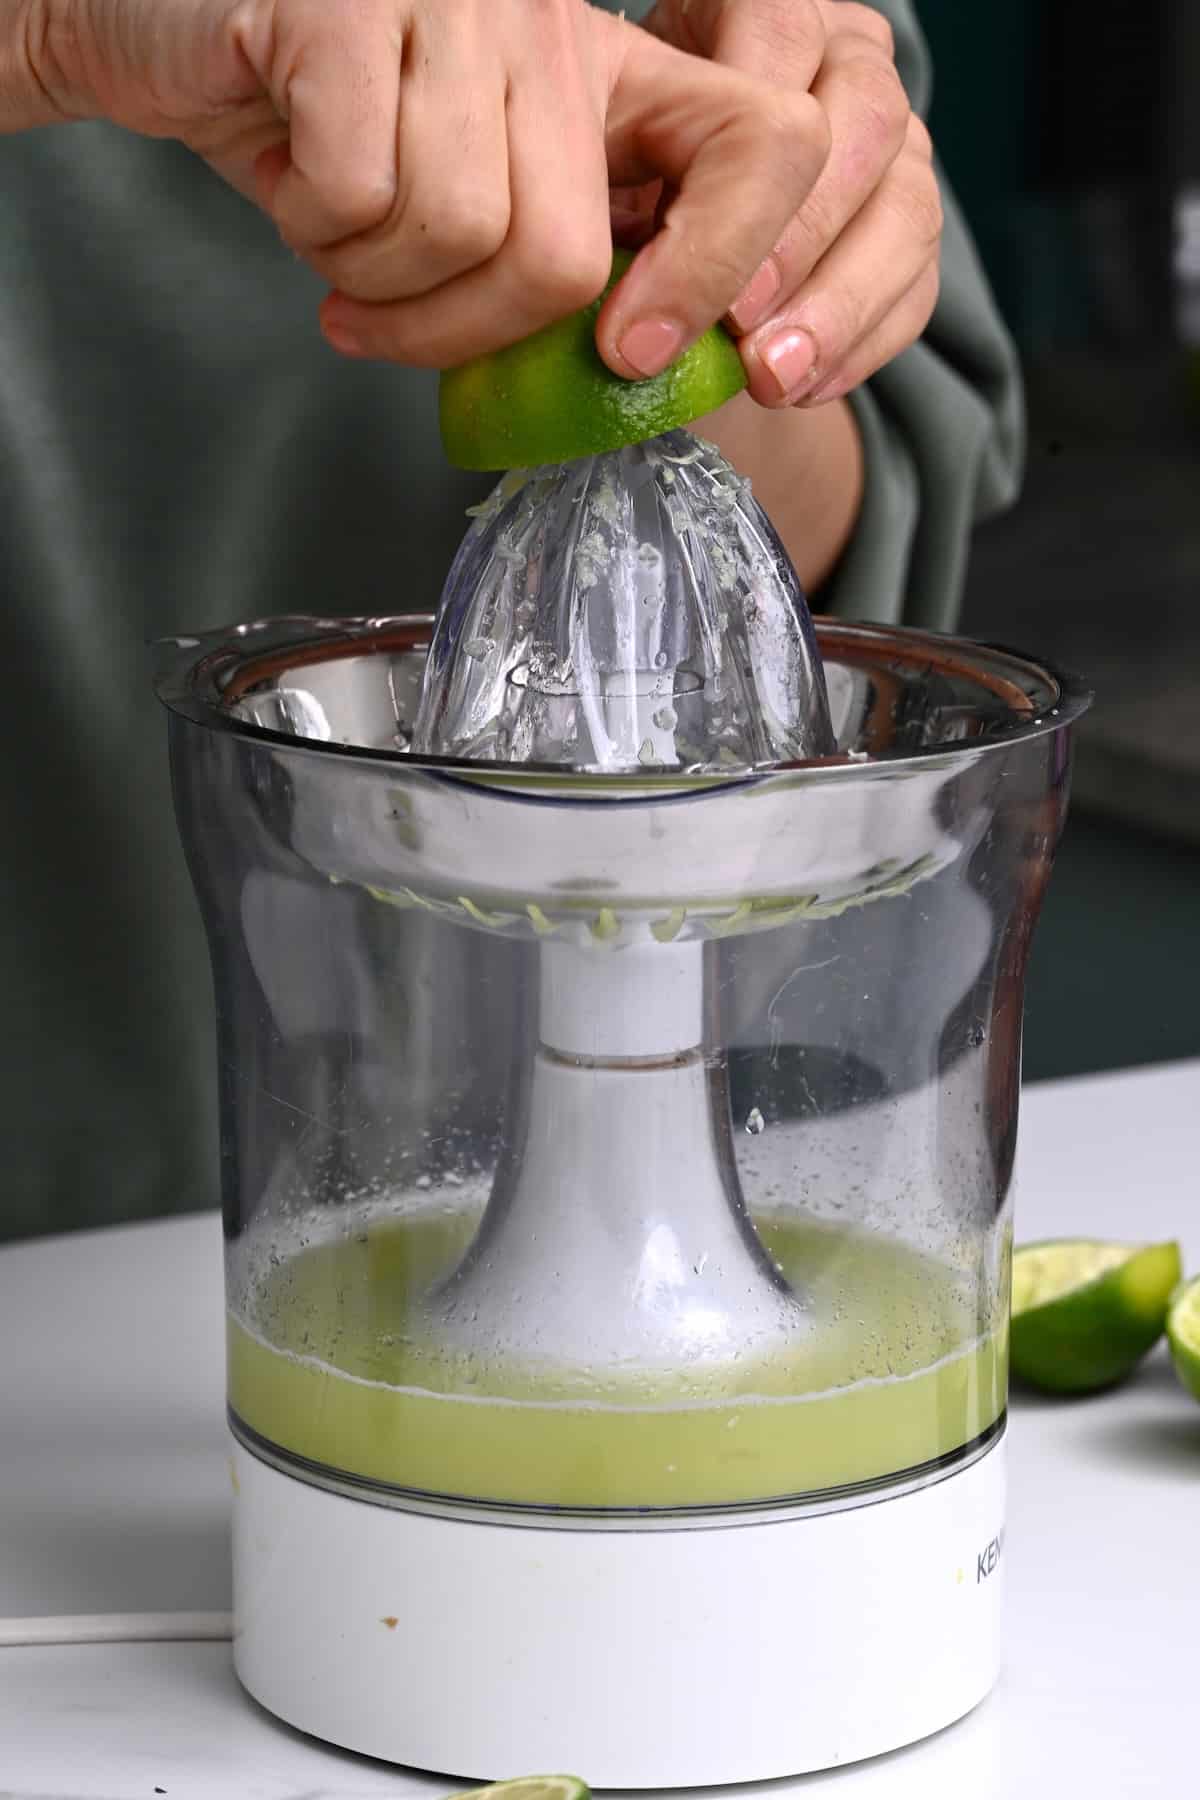 Juicing a lime on a citrus juicer